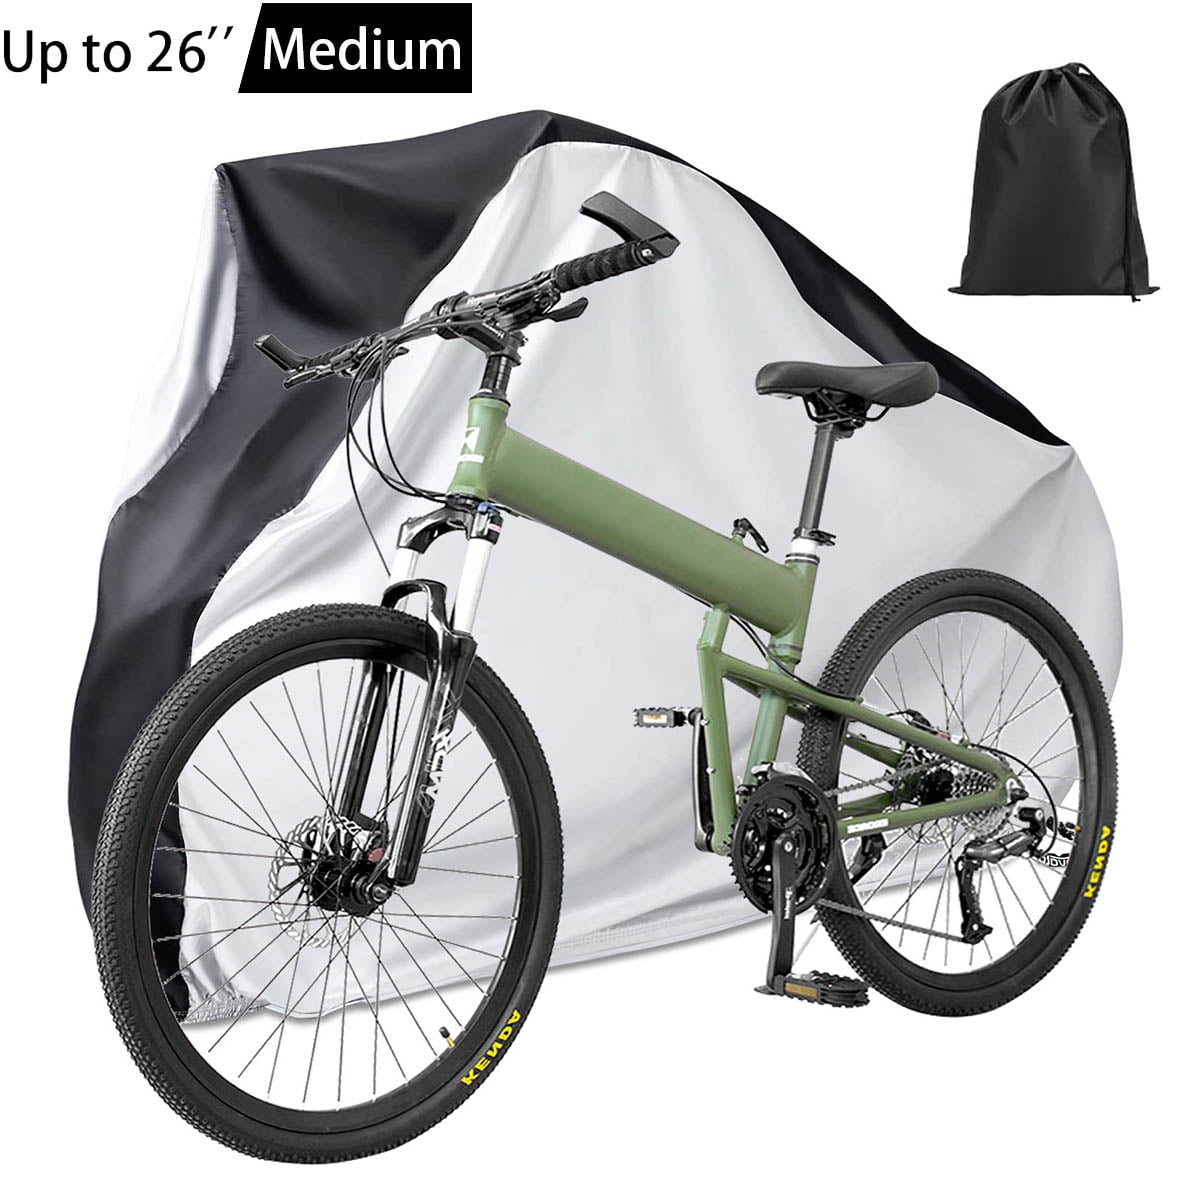 Voyager, Lightweight, Water Resistant Bike Covers